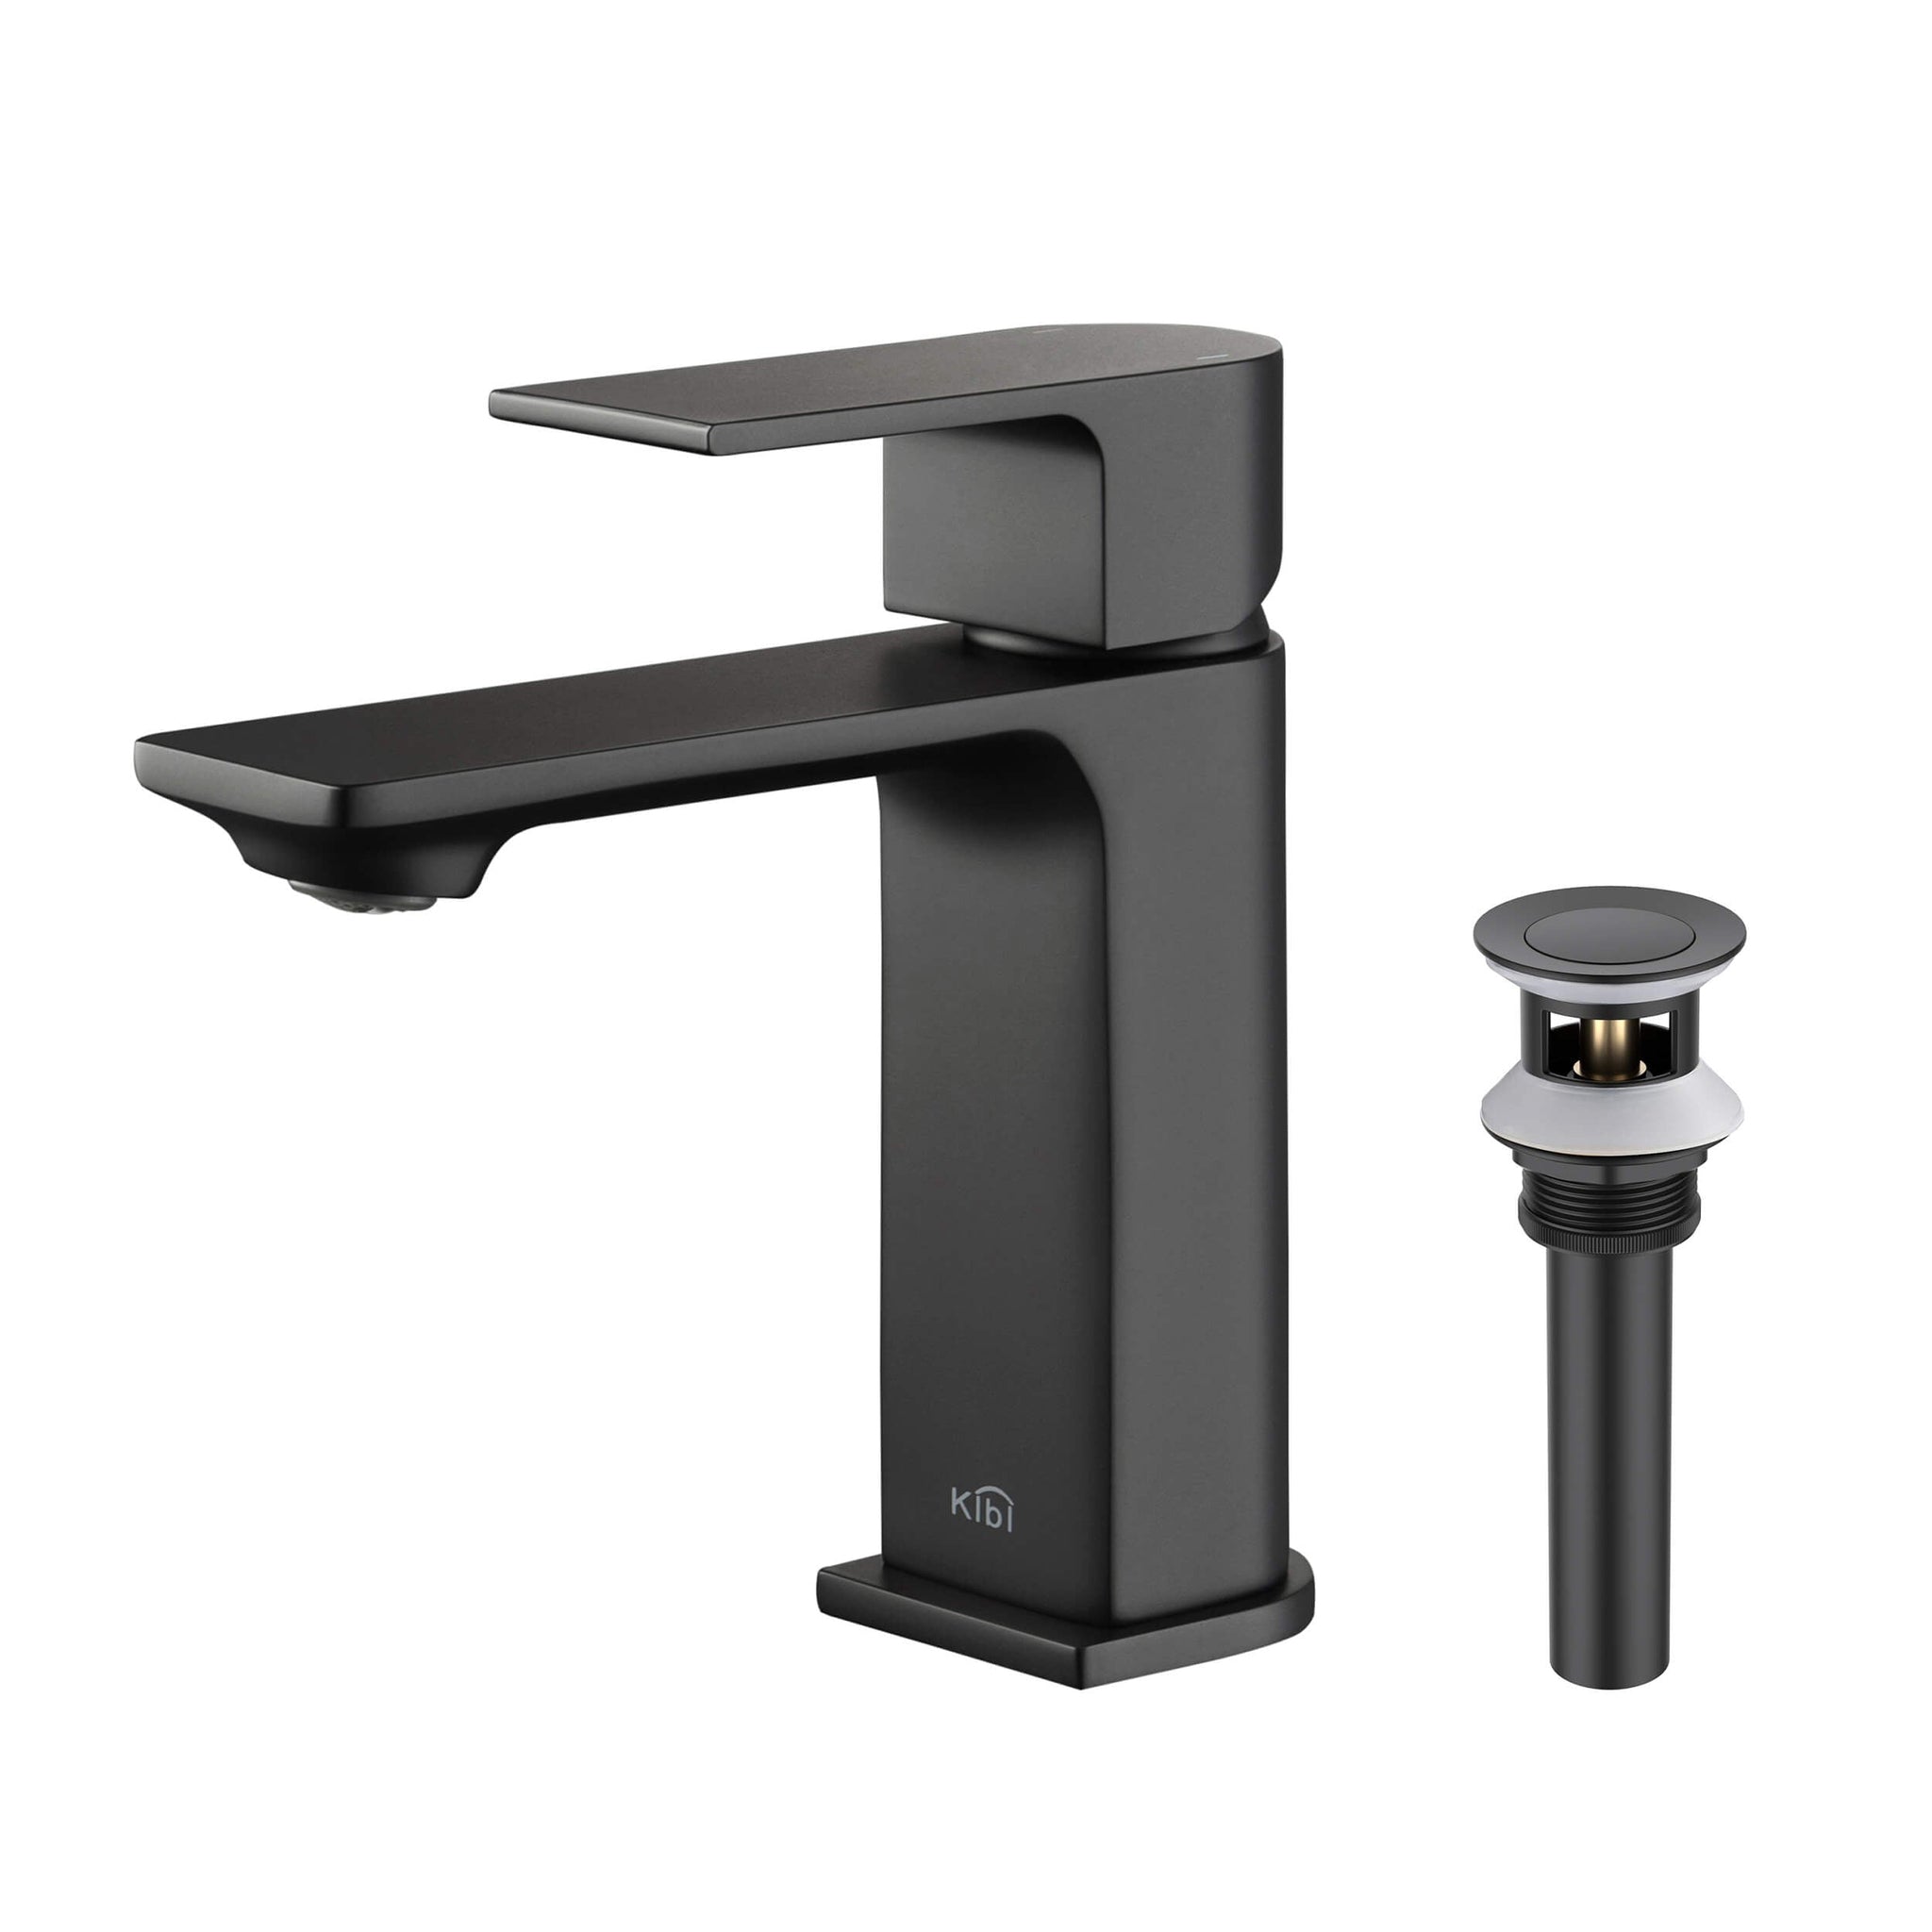 KIBI, KIBI Mirage Single Handle Matte Black Solid Brass Bathroom Vanity Sink Faucet With Pop-Up Drain Stopper Small Cover With Overflow